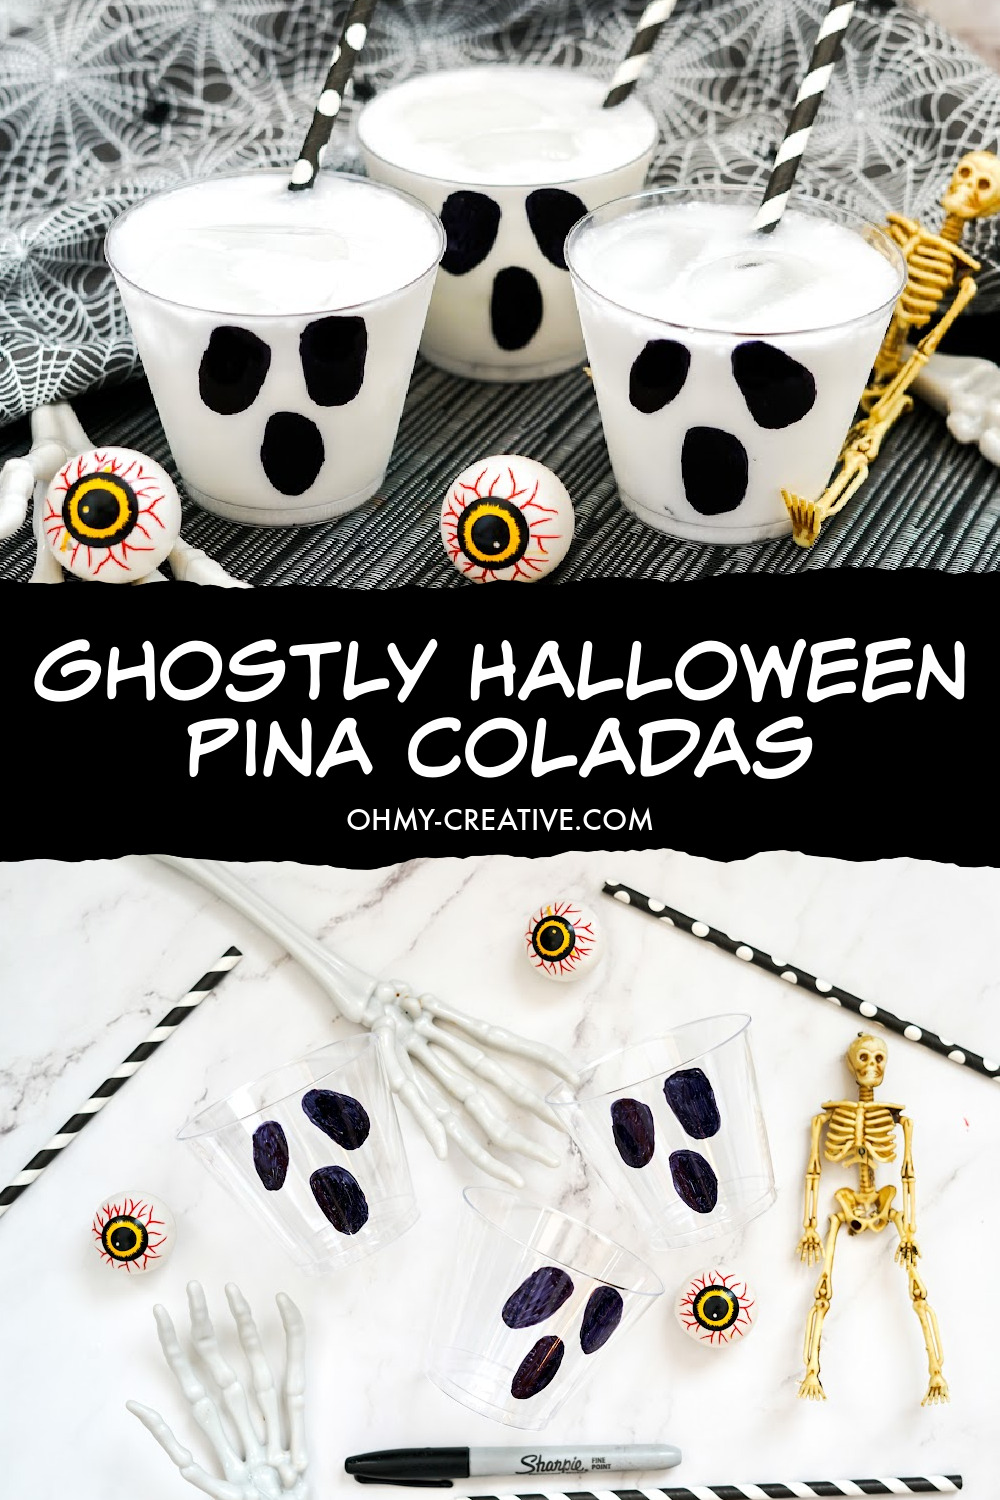 These ghost Halloween pina coladas are sitting on a black and white striped background with a spider web print in the background. Plastic eye balls and skeleton hands make this a spooky Halloween drink!